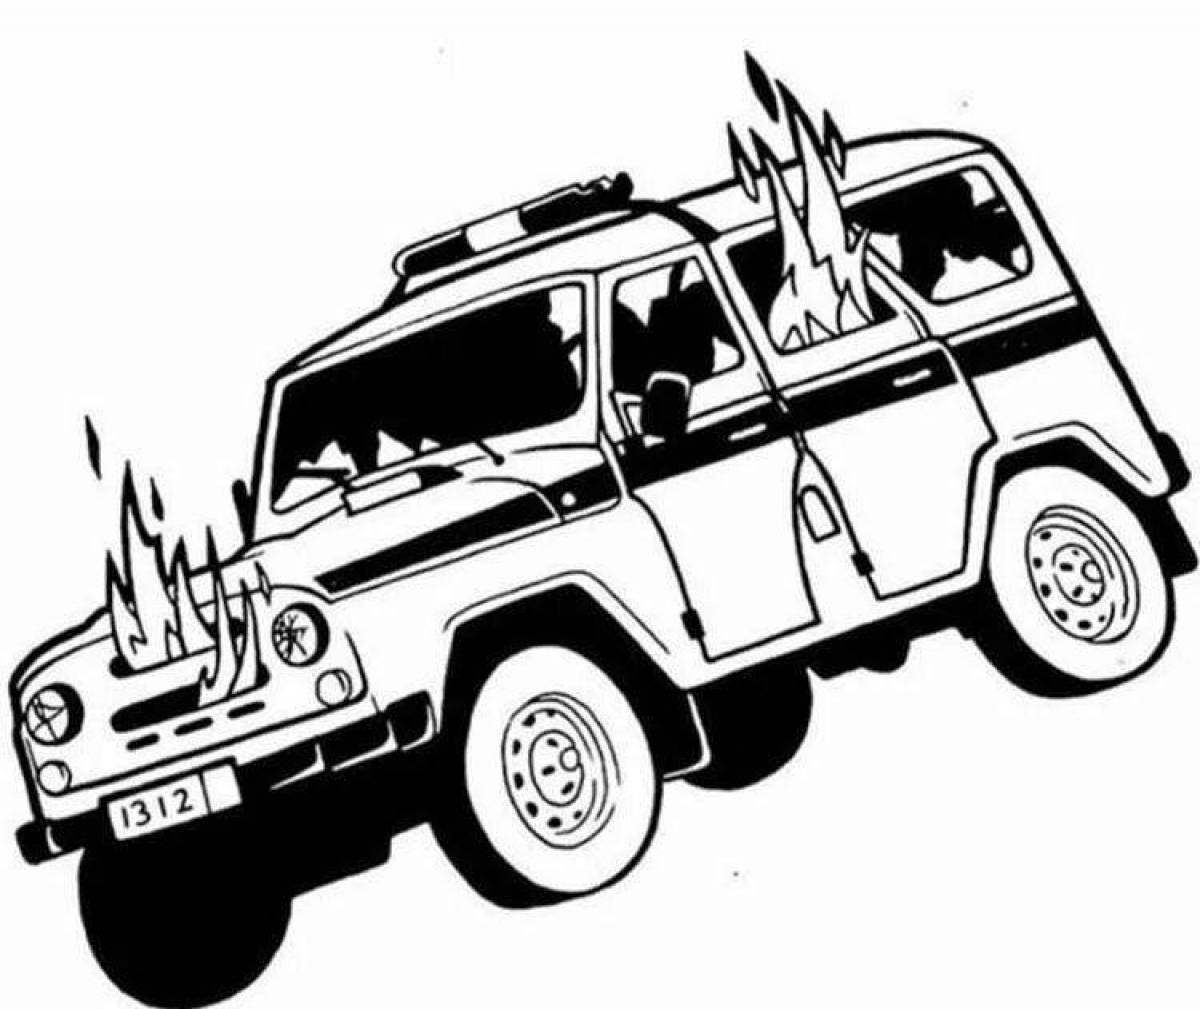 Charming police UAZ coloring book